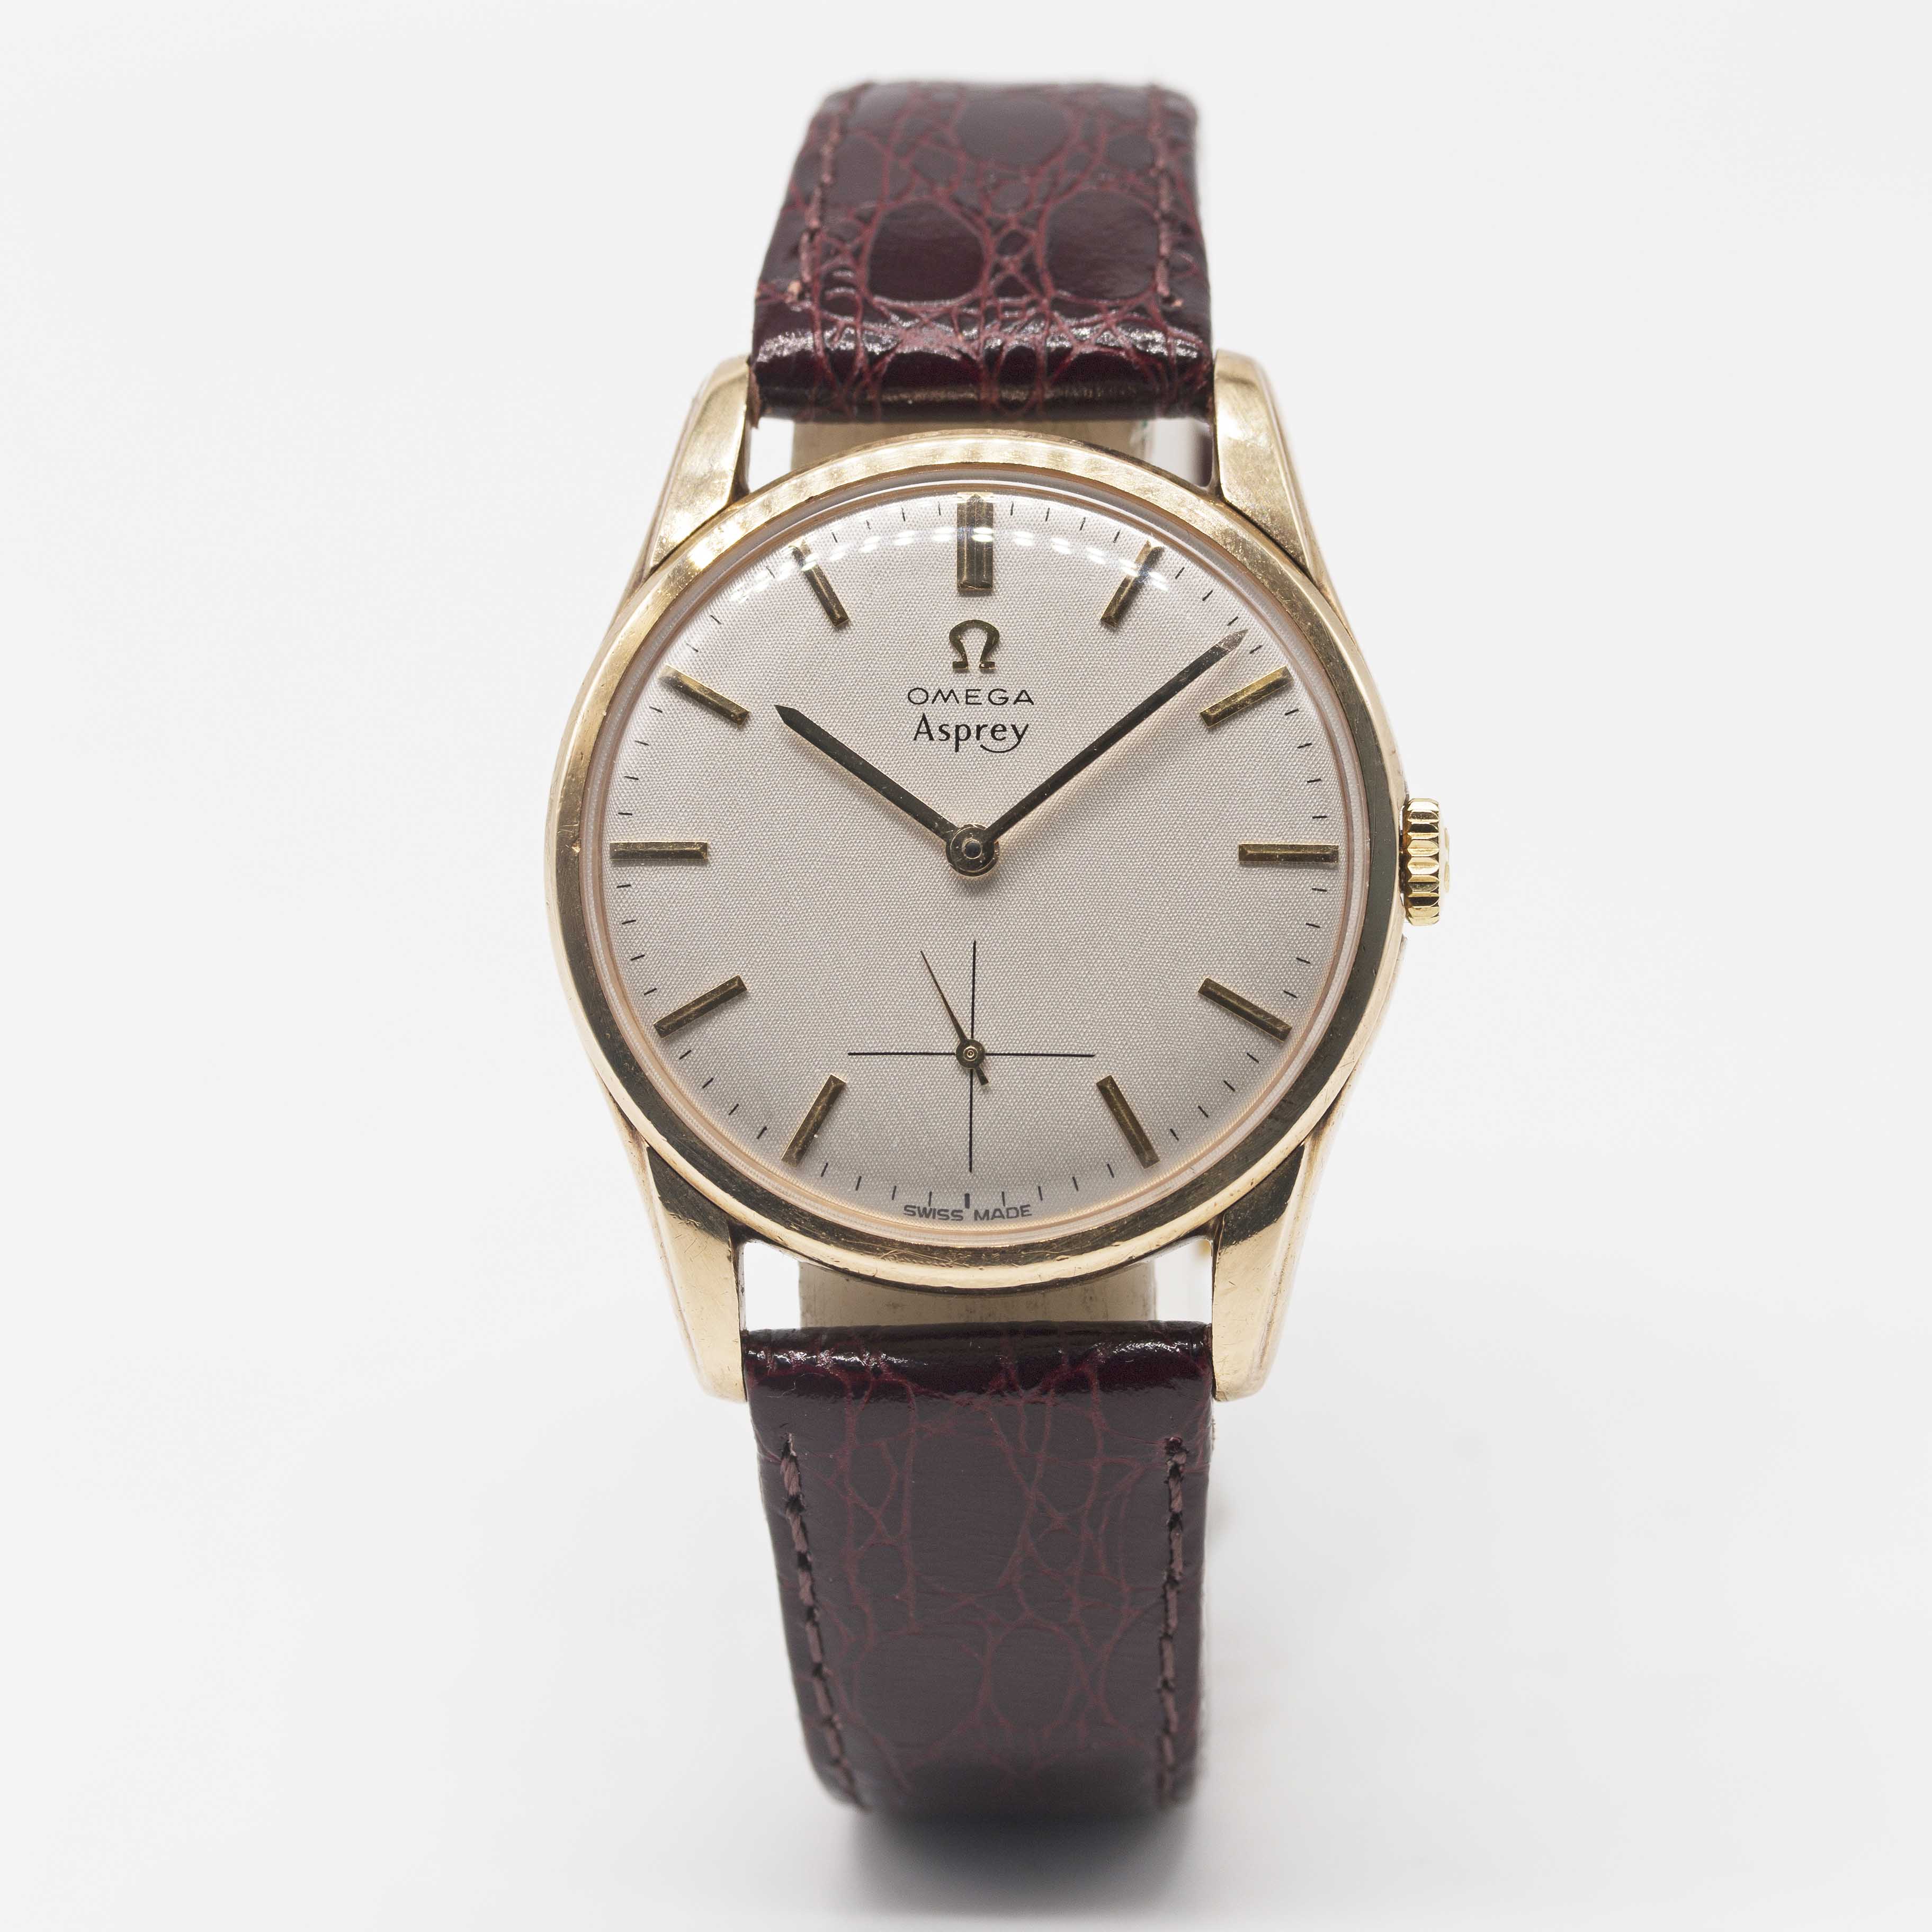 A GENTLEMAN'S 9CT SOLID GOLD OMEGA WRIST WATCH CIRCA 1964, RETAILED BY ASPREY WITH CO-SIGNED "LINEN" - Image 2 of 6